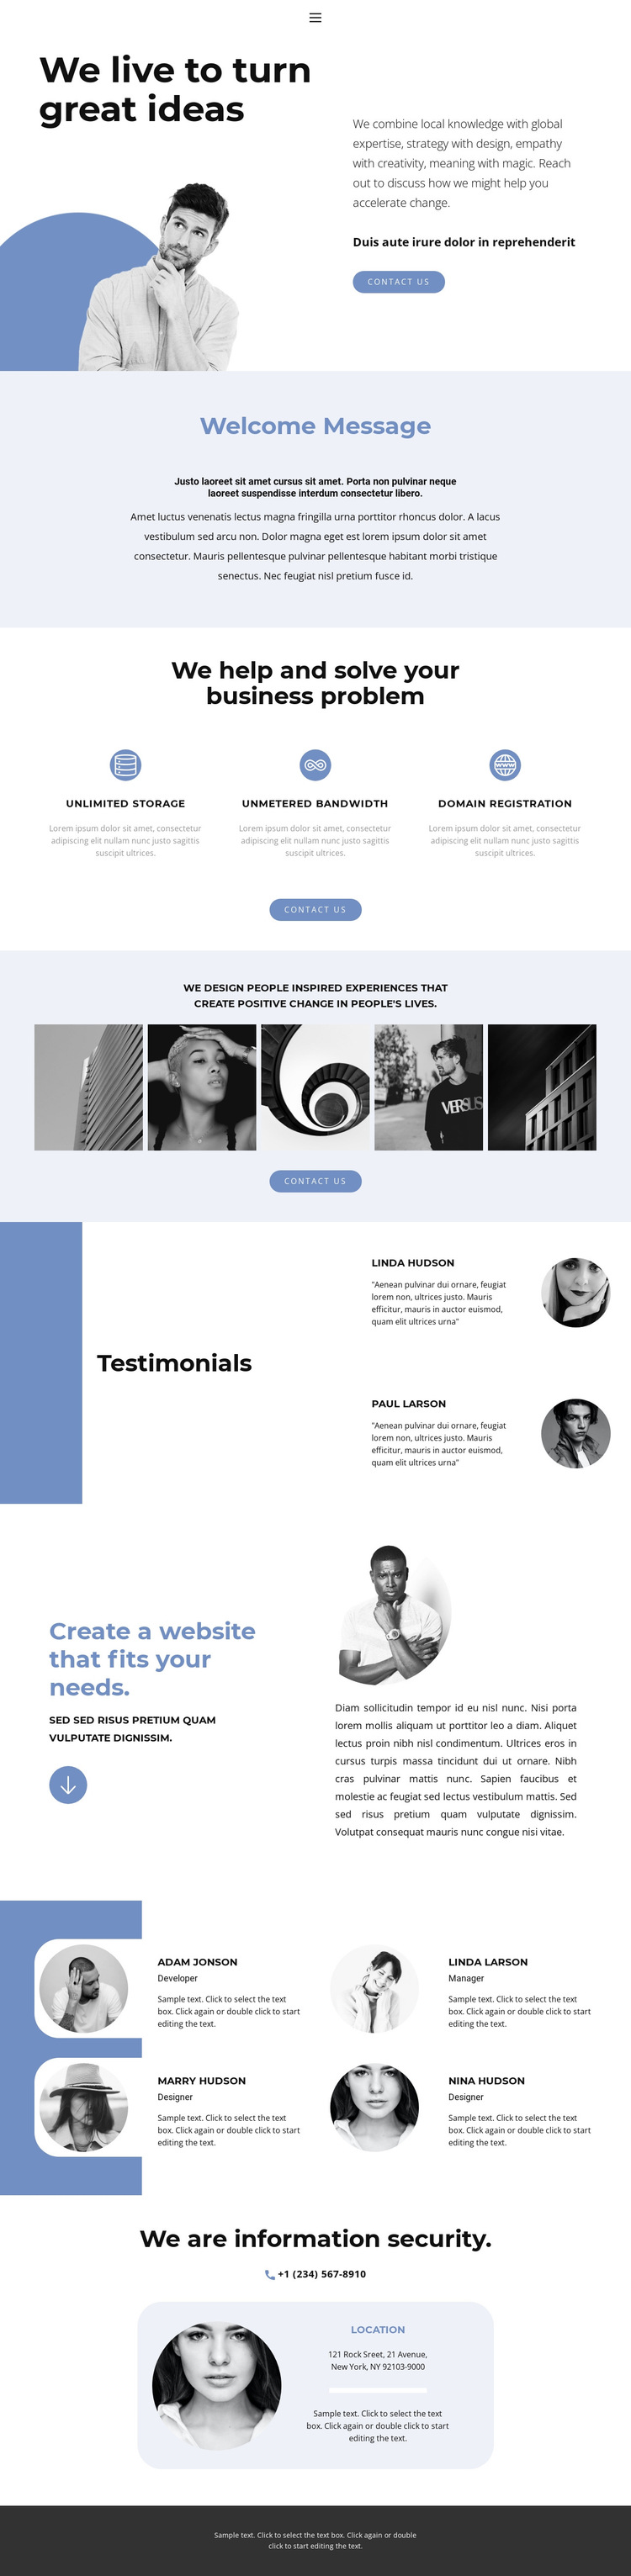 The embodiment of bold ideas HTML5 Template